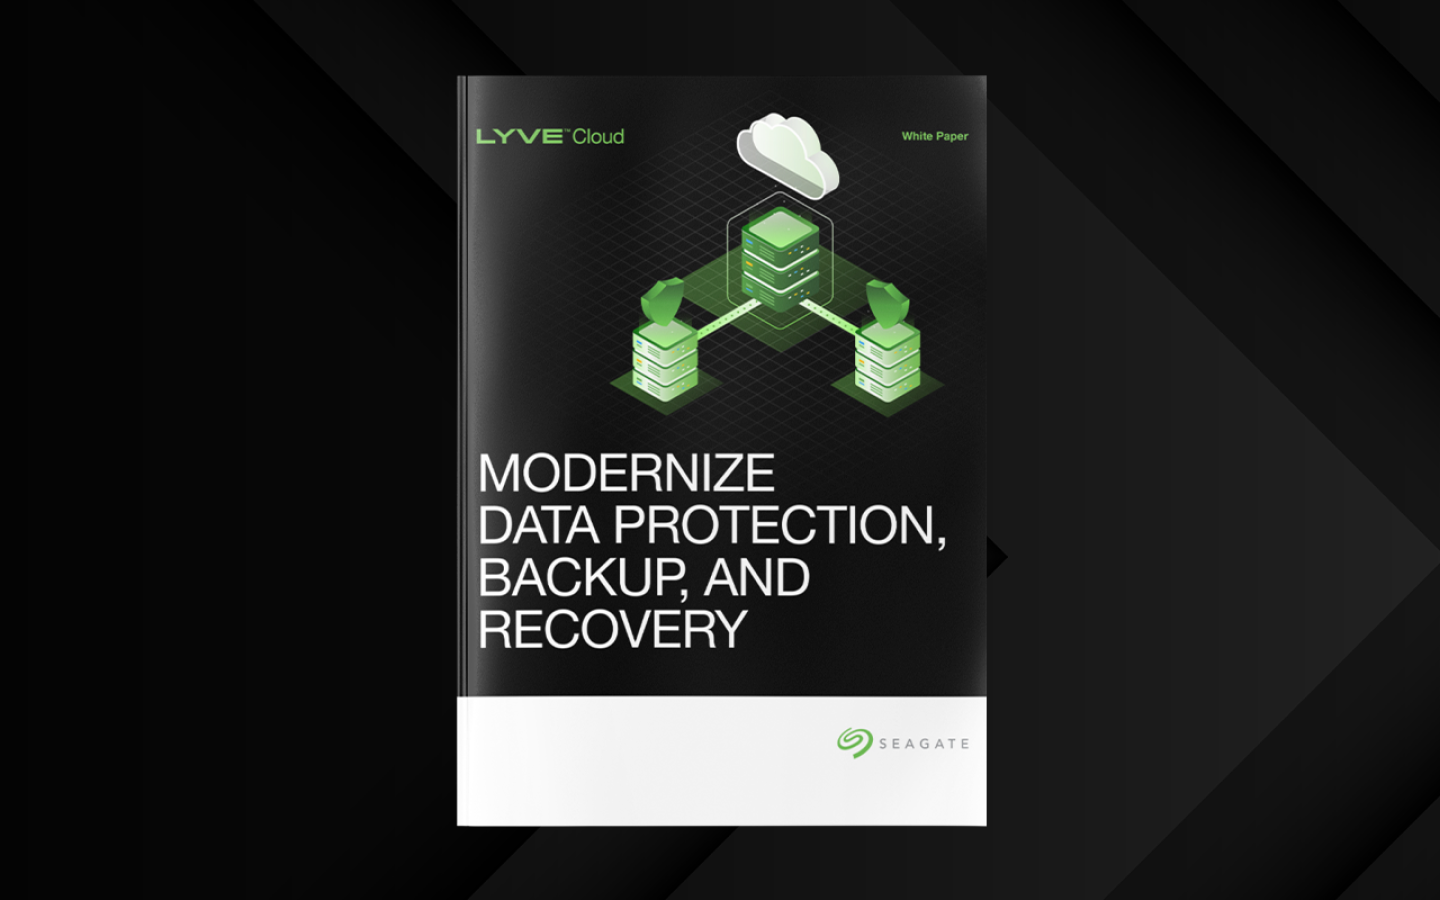 seagate-lyve-cloud-microsite-phase-one-additional-resources-white-paper-modernize-data-protection-1440x900.png